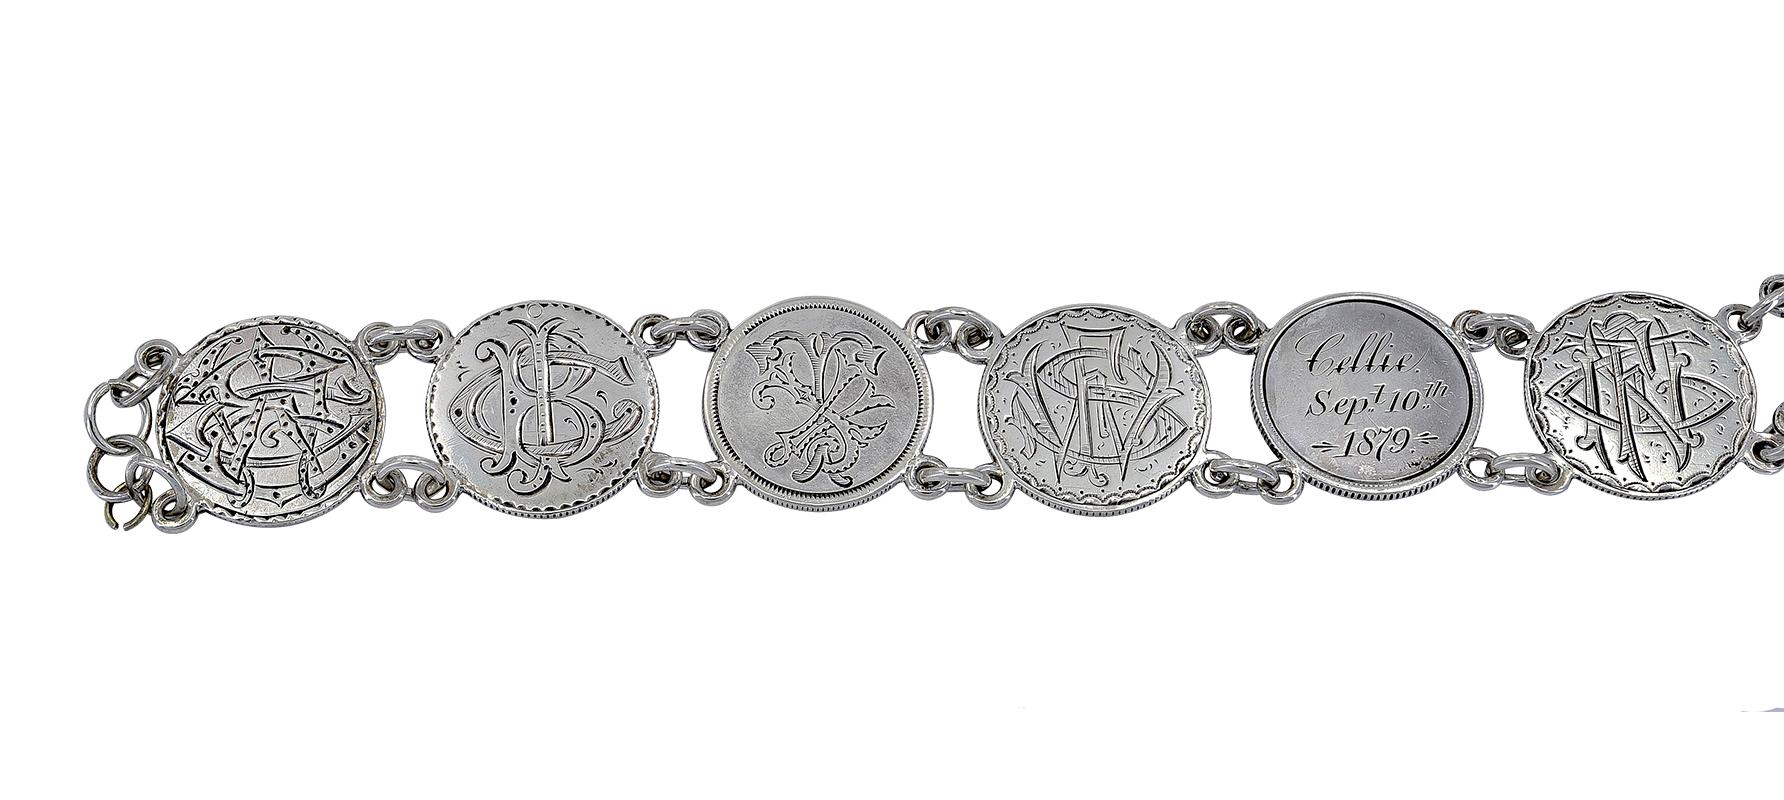 Lovely and romantic antique bracelet,.  Comprised of eight silver dimes picturing Lady Liberty, dating from 1874 to 1878.  These dimes were considered love tokens because of the intricate intertwined initials on the reverse side.  Sterling silver